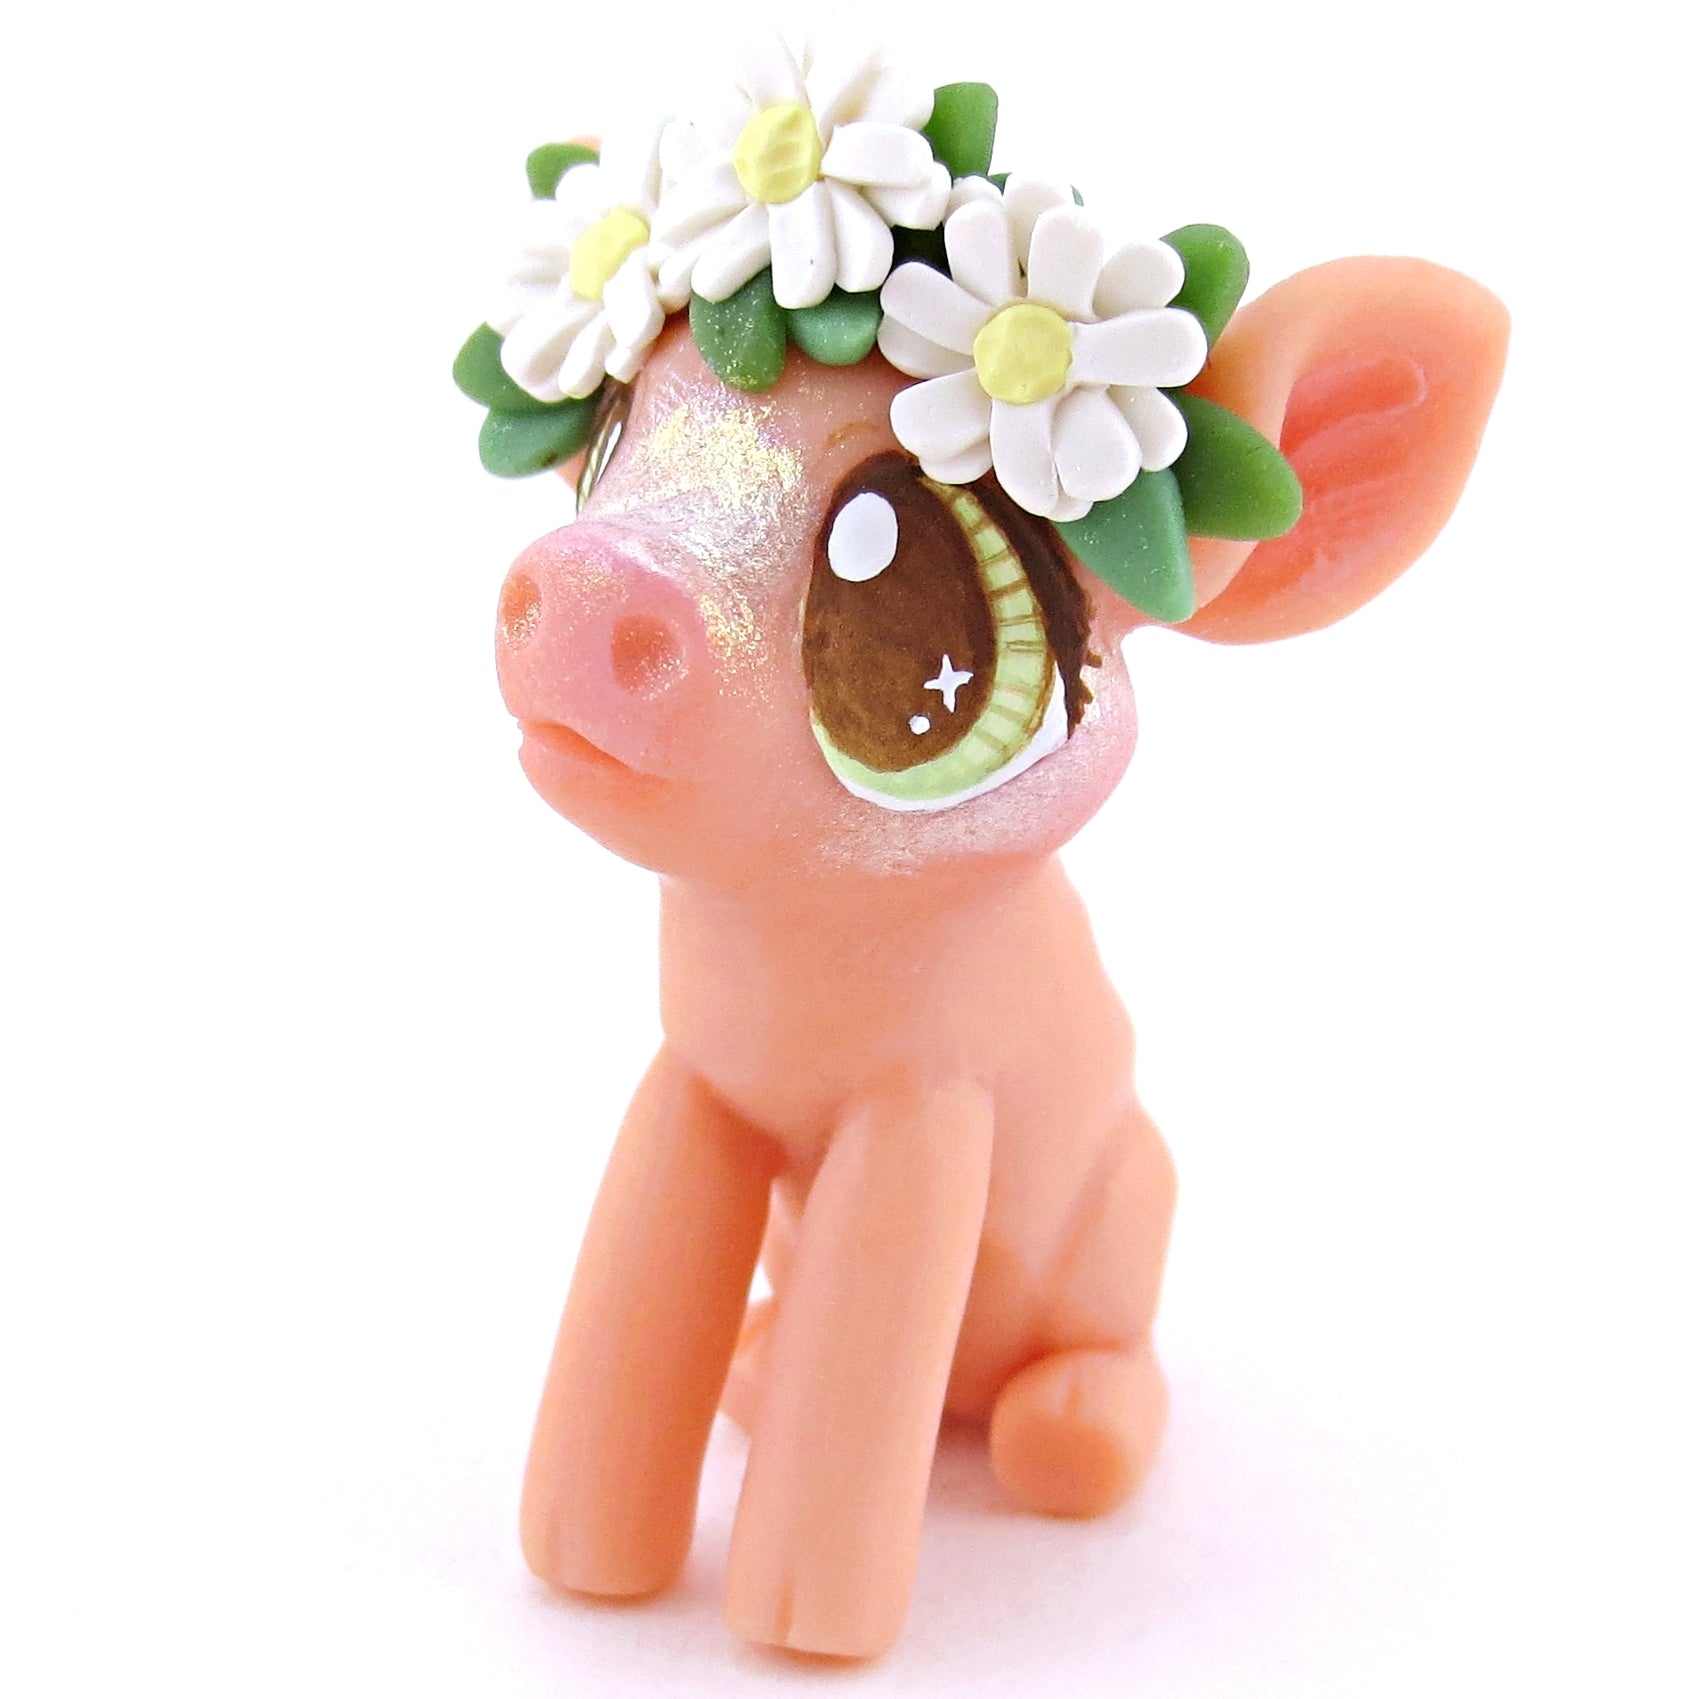 Daisy Crown Pink Pig Figurine - Polymer Clay Easter and Spring Animals